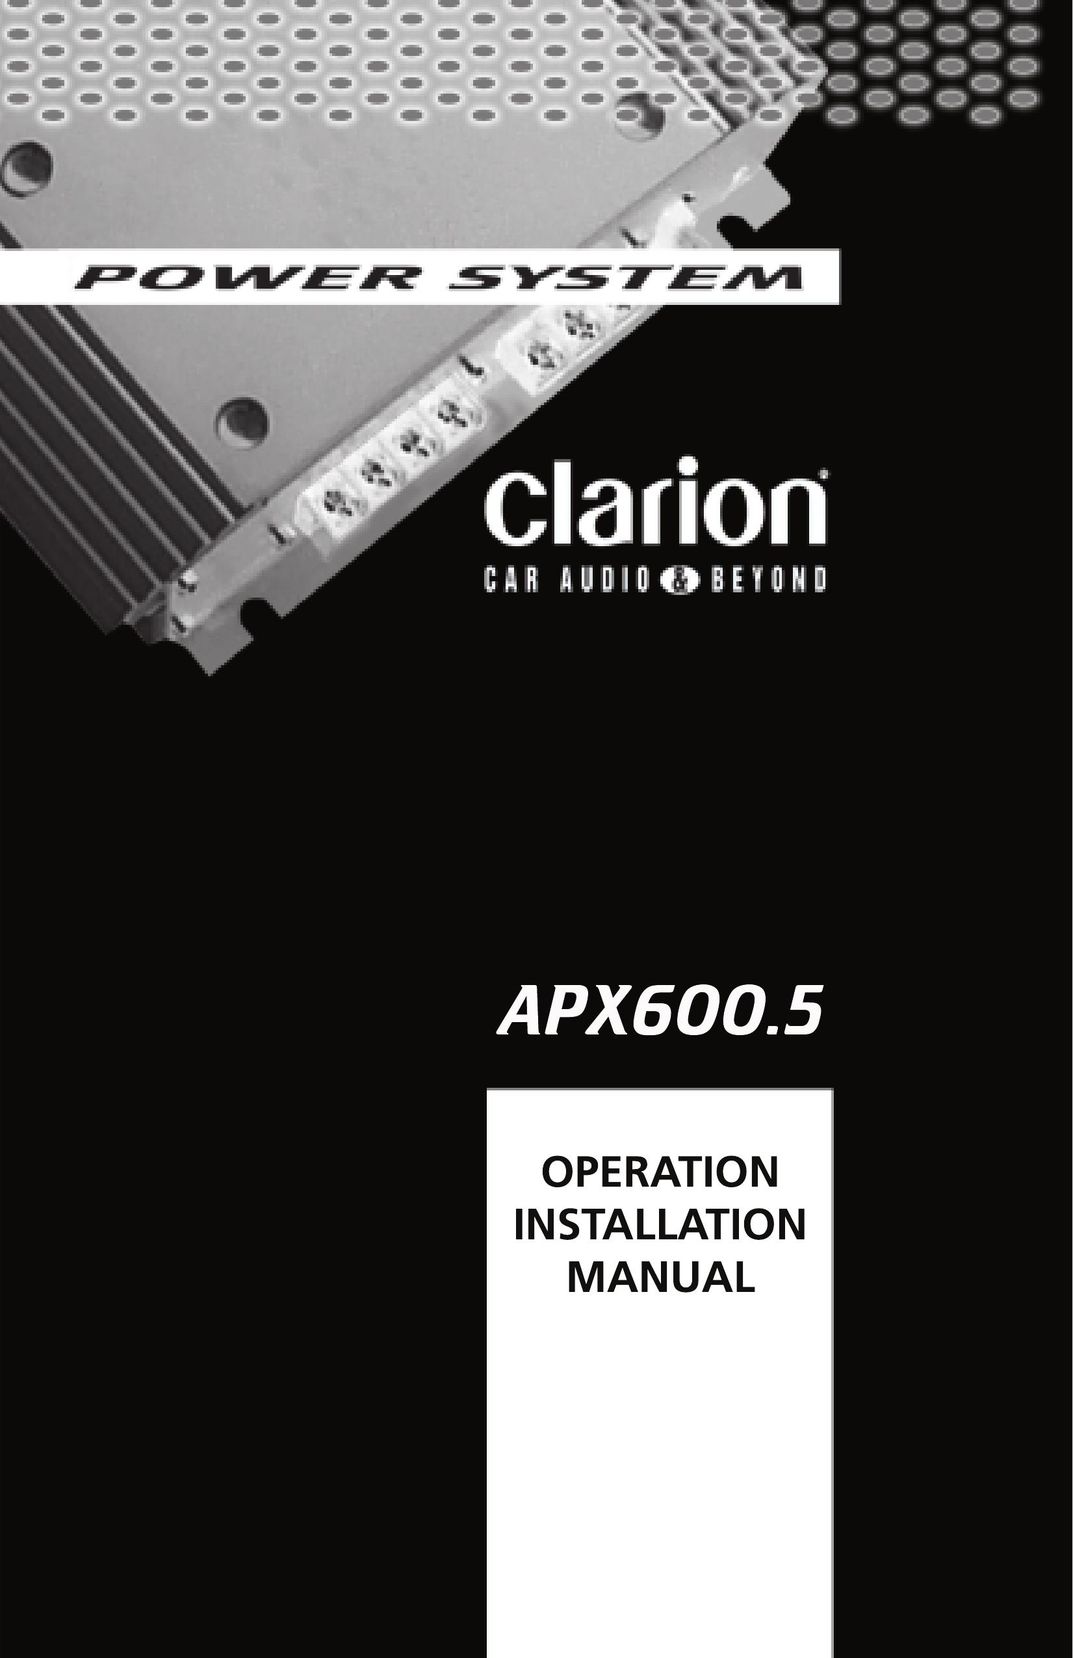 Clarion APX600.5 Power Supply User Manual